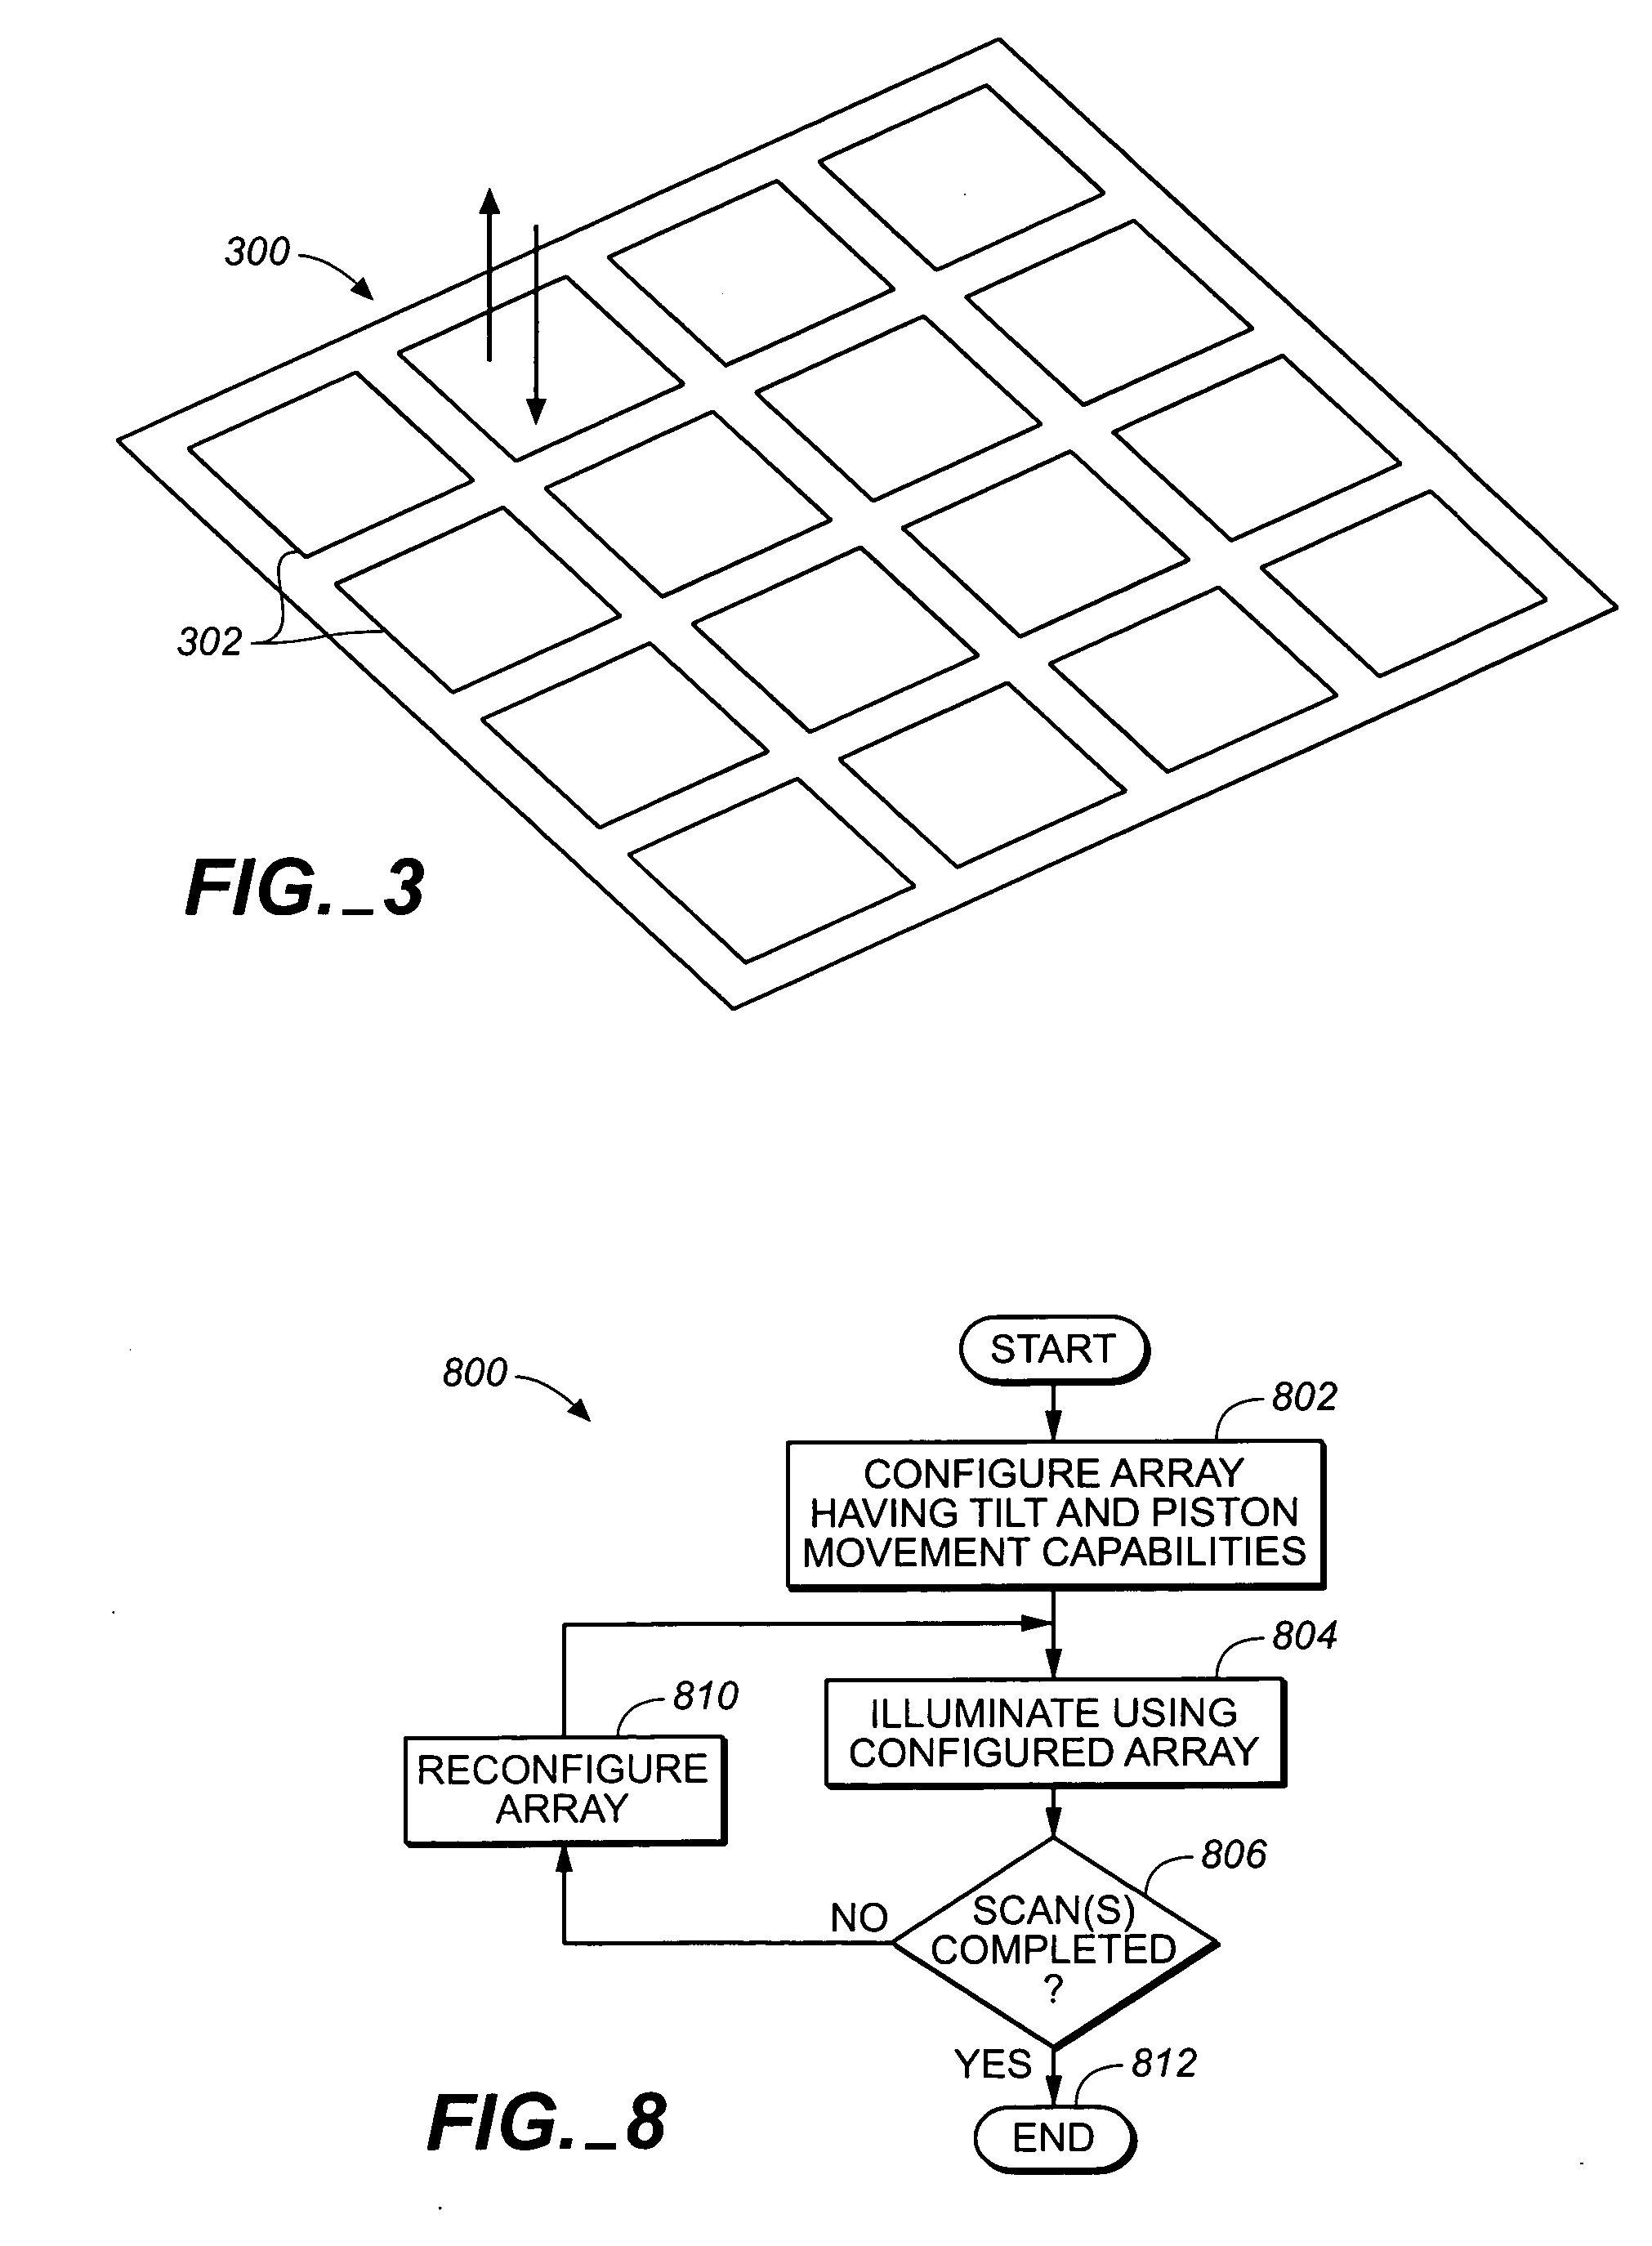 Optimized mirror design for optical direct write